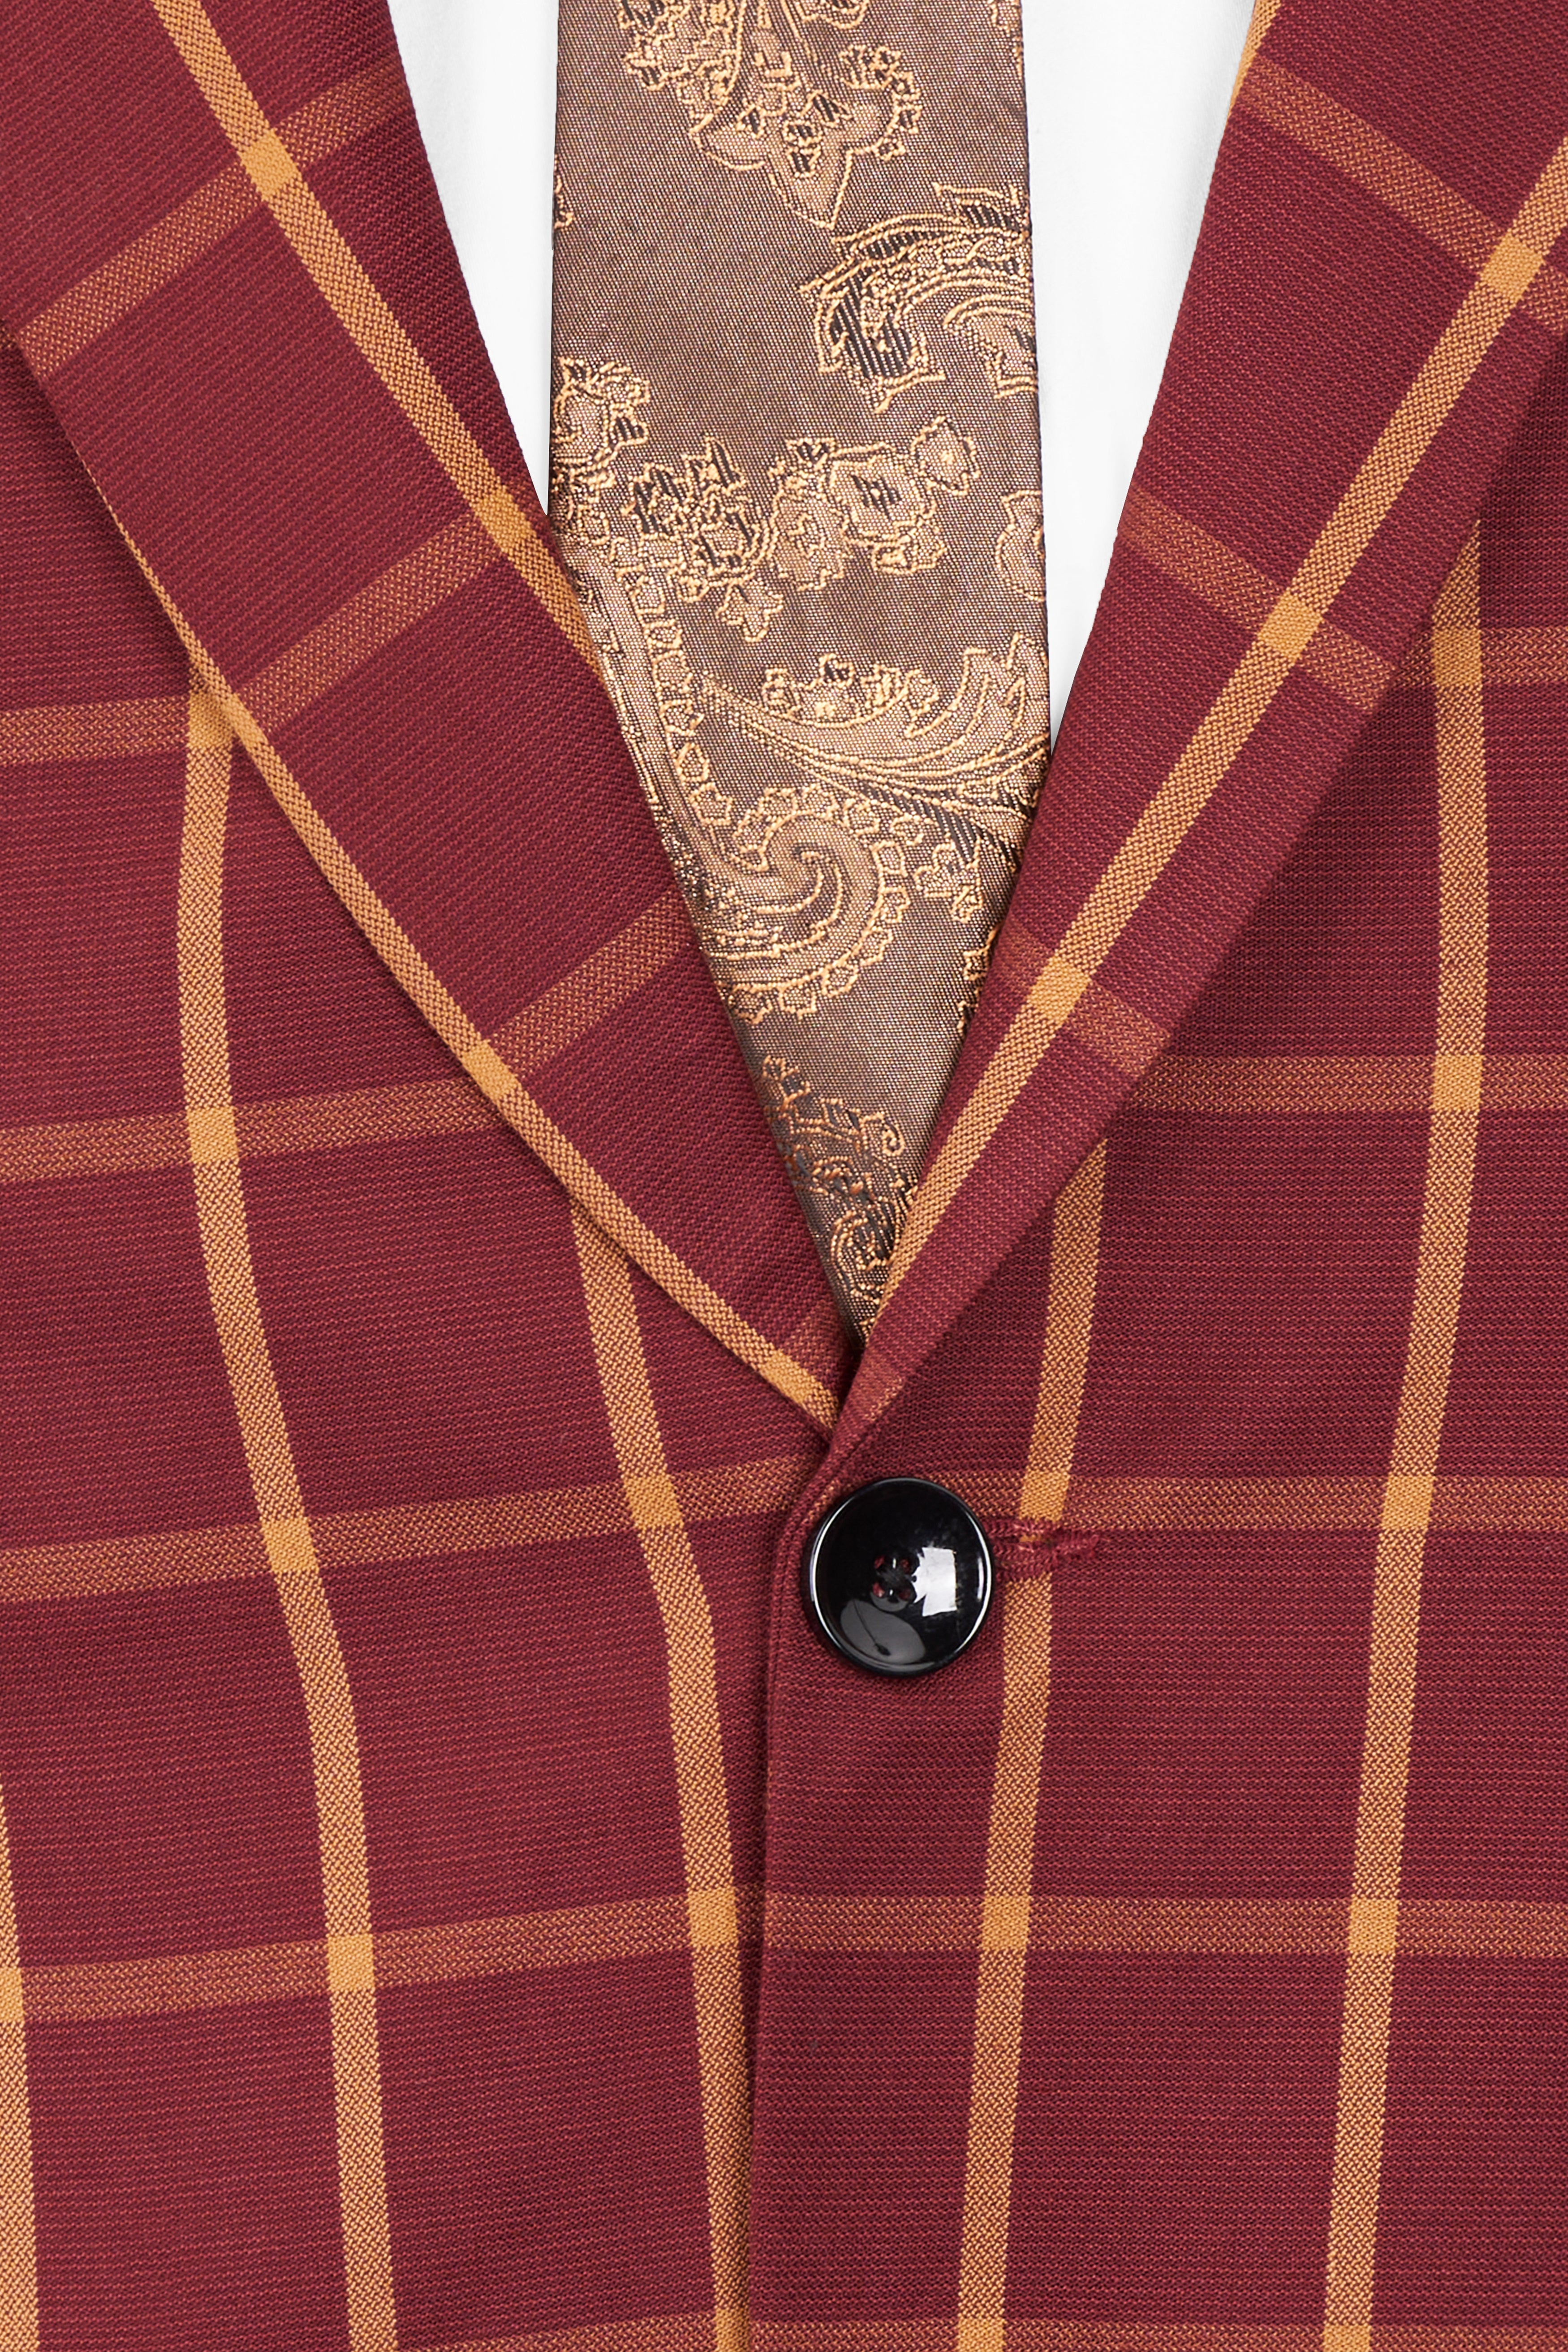 Wine and Chestnut Brown Plaid Single Breasted Suit